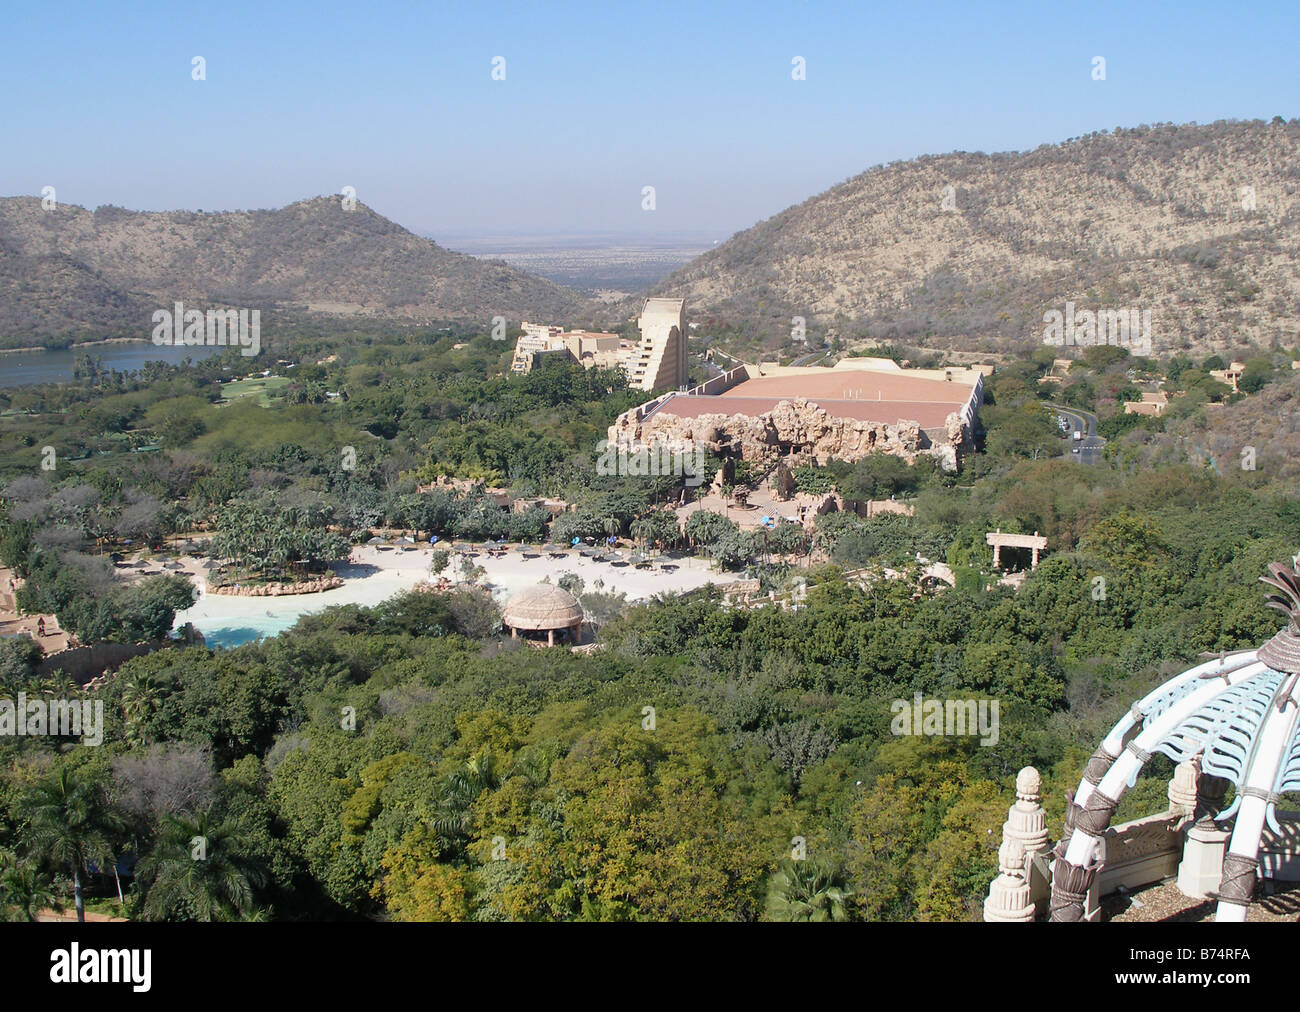 A view from The Palace of the Lost City in Sun City, South Africa Stock Photo